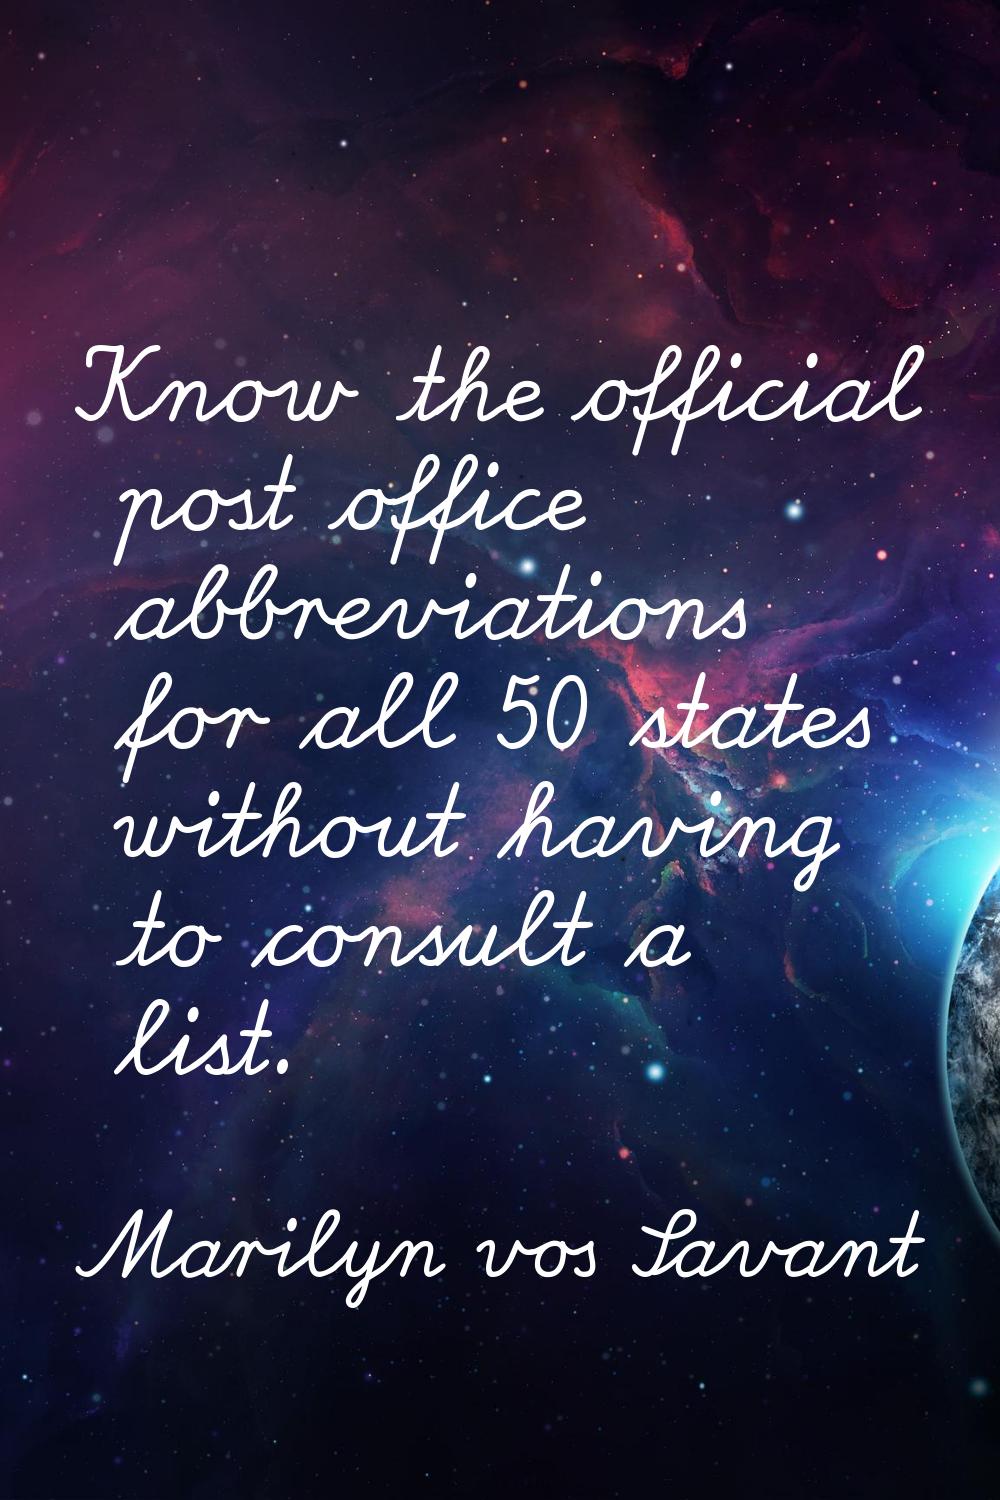 Know the official post office abbreviations for all 50 states without having to consult a list.